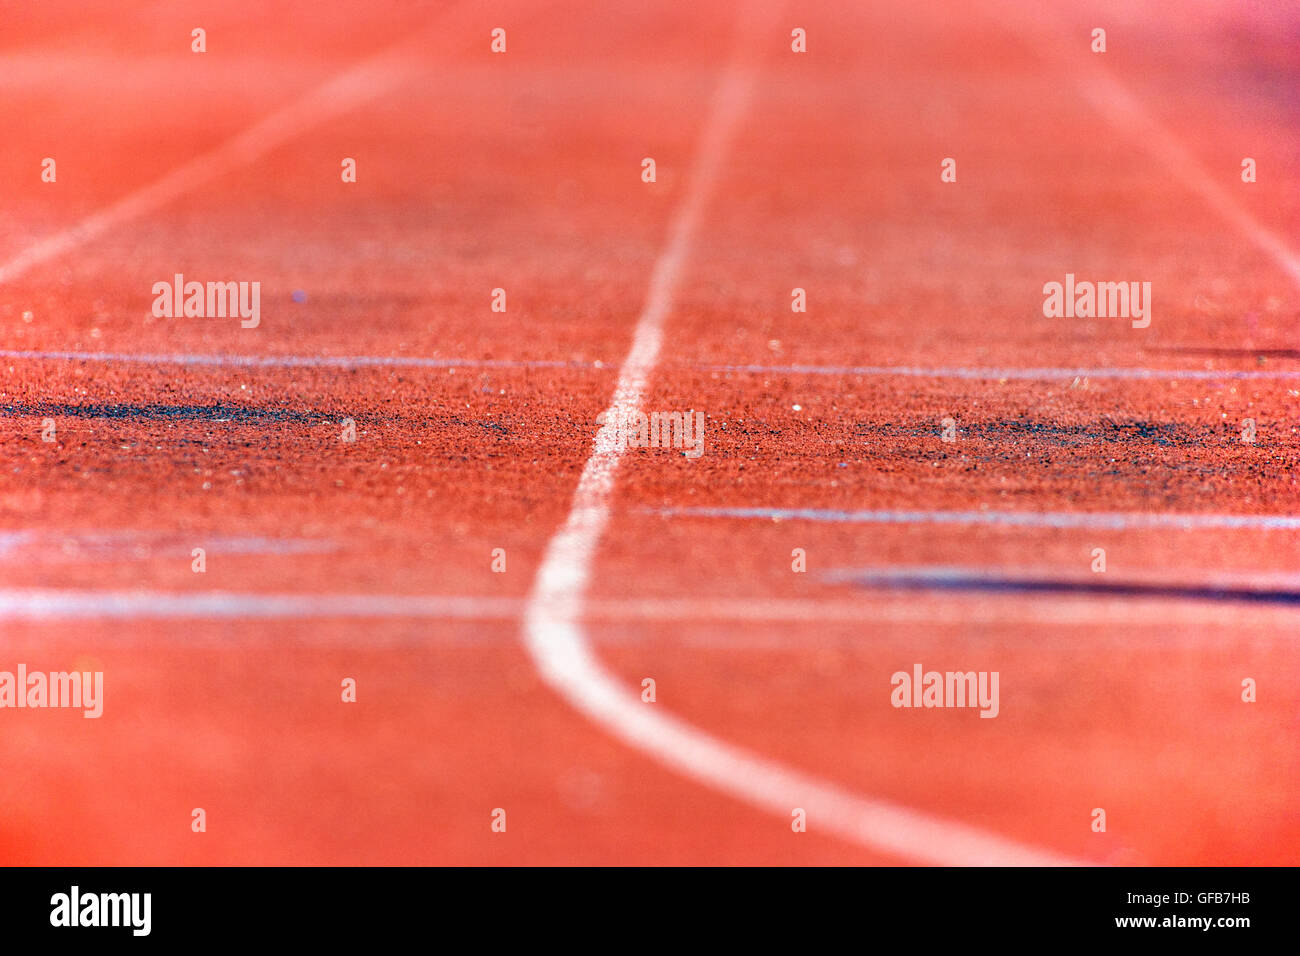 Close up of the synthetic track surface at a high school track & field meet Stock Photo